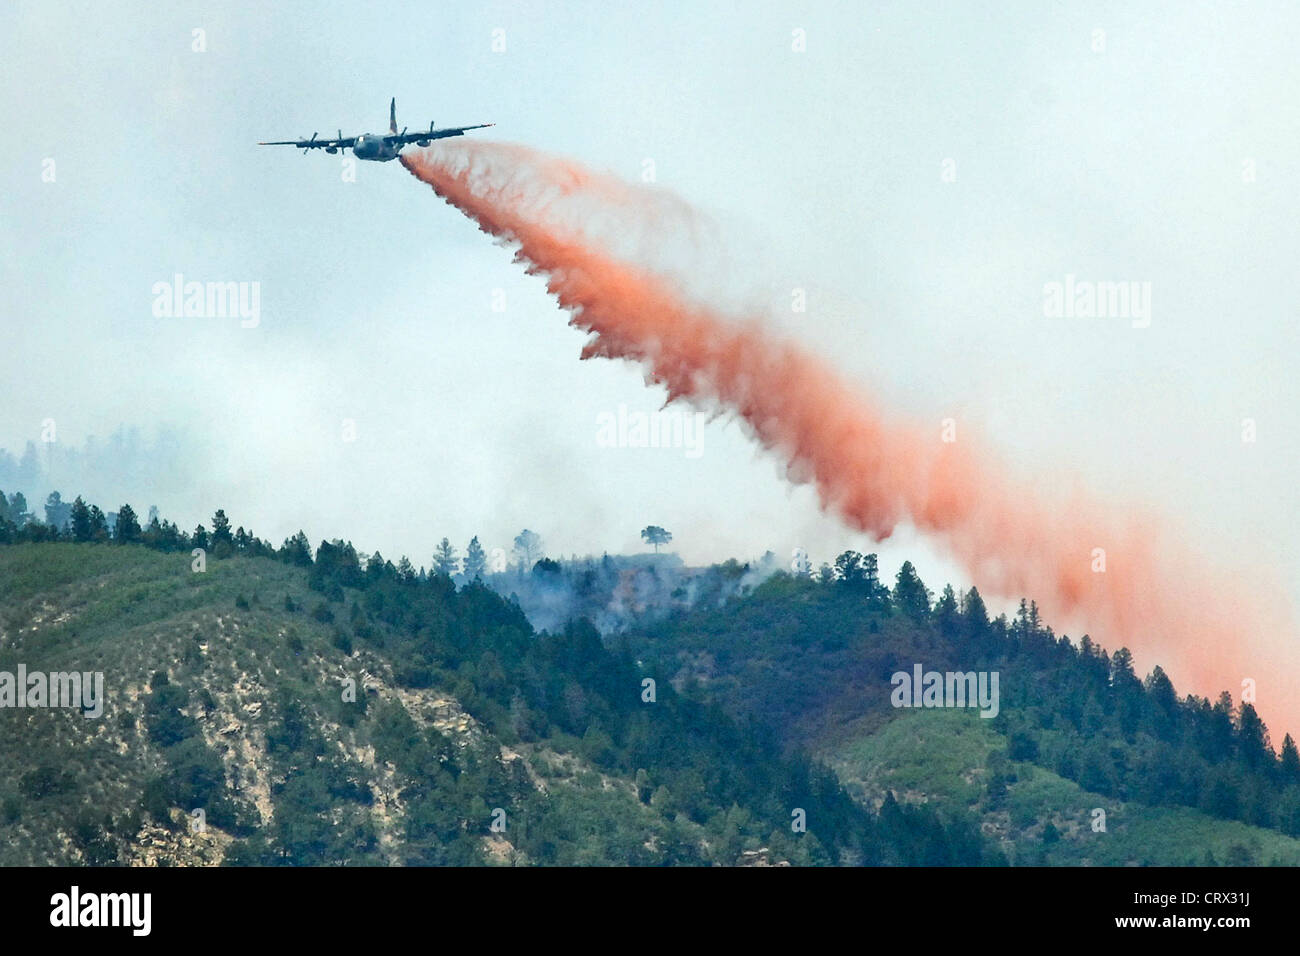 A US Air Force MAFFS-equipped C-130 Hercules aircraft drops fire retardant on the Waldo Canyon wild fire as firefighters continued to battle the blaze June 28, 2012 in Colorado Springs, Colorado. Stock Photo